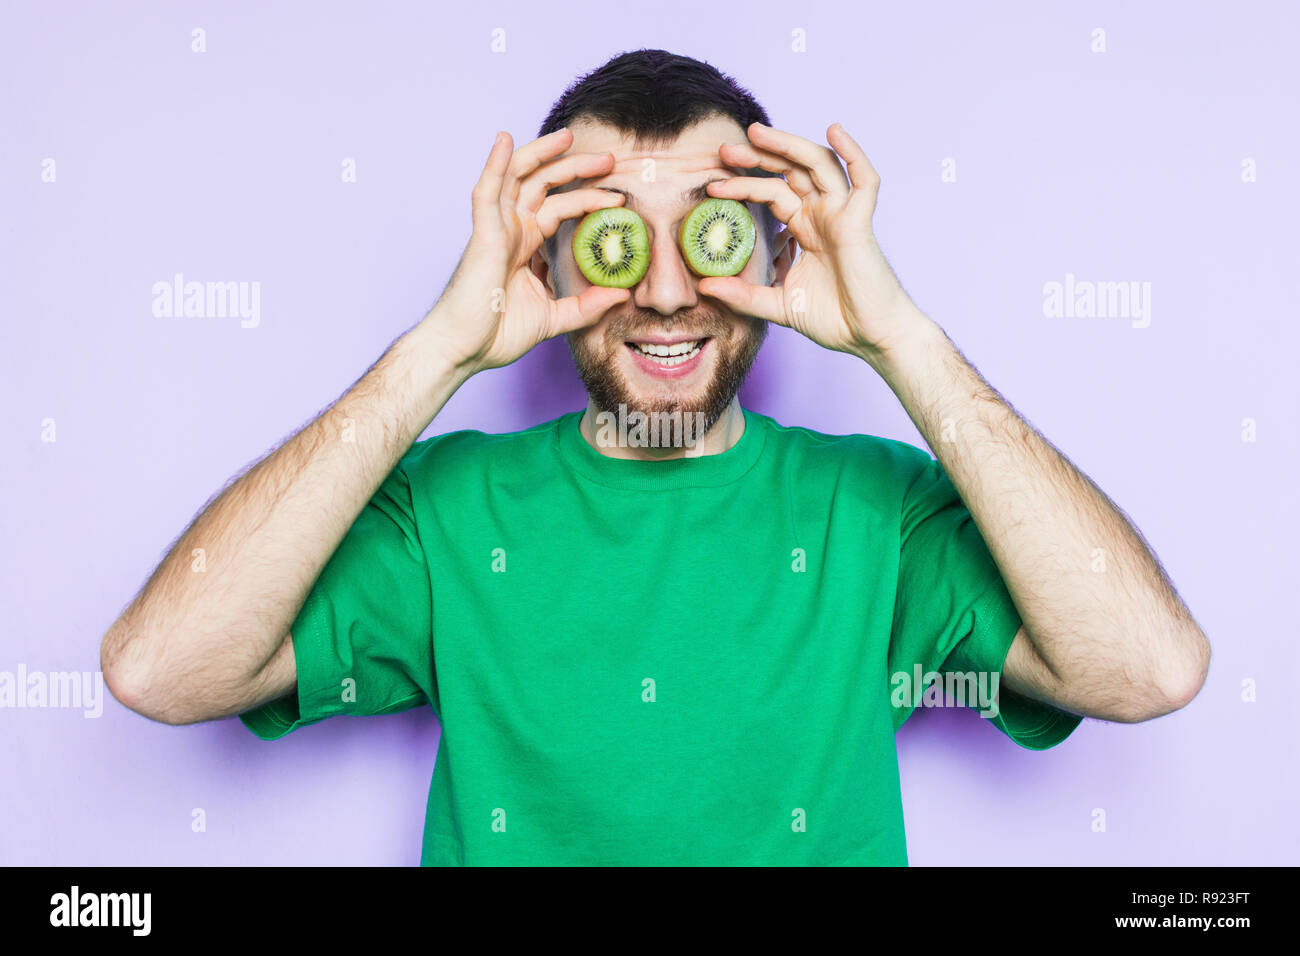 Young bearded man holding slices of green kiwi fruit in front of his eyes, smiling and surprised. Light purple background, copy space. Stock Photo